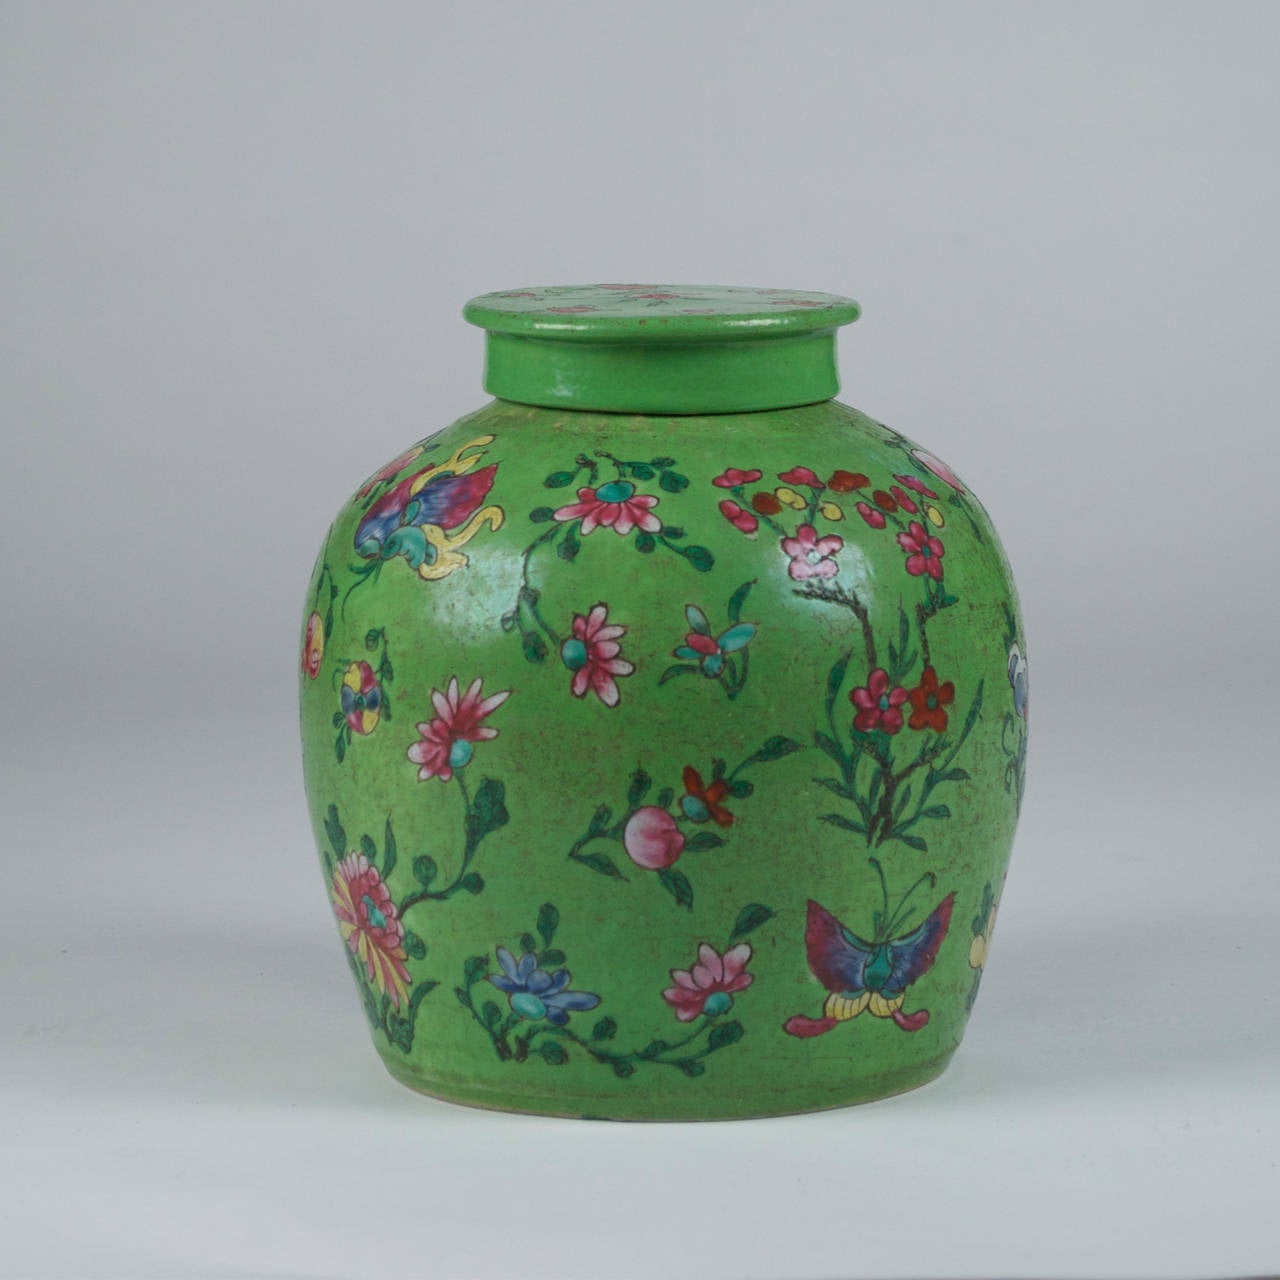 Handmade Chinese pot/vase made sometime in the late 18th-early 19th century. Beautifully hand-painted, with matching lid. This piece is eye catching and vibrant, with gorgeous details and colors.